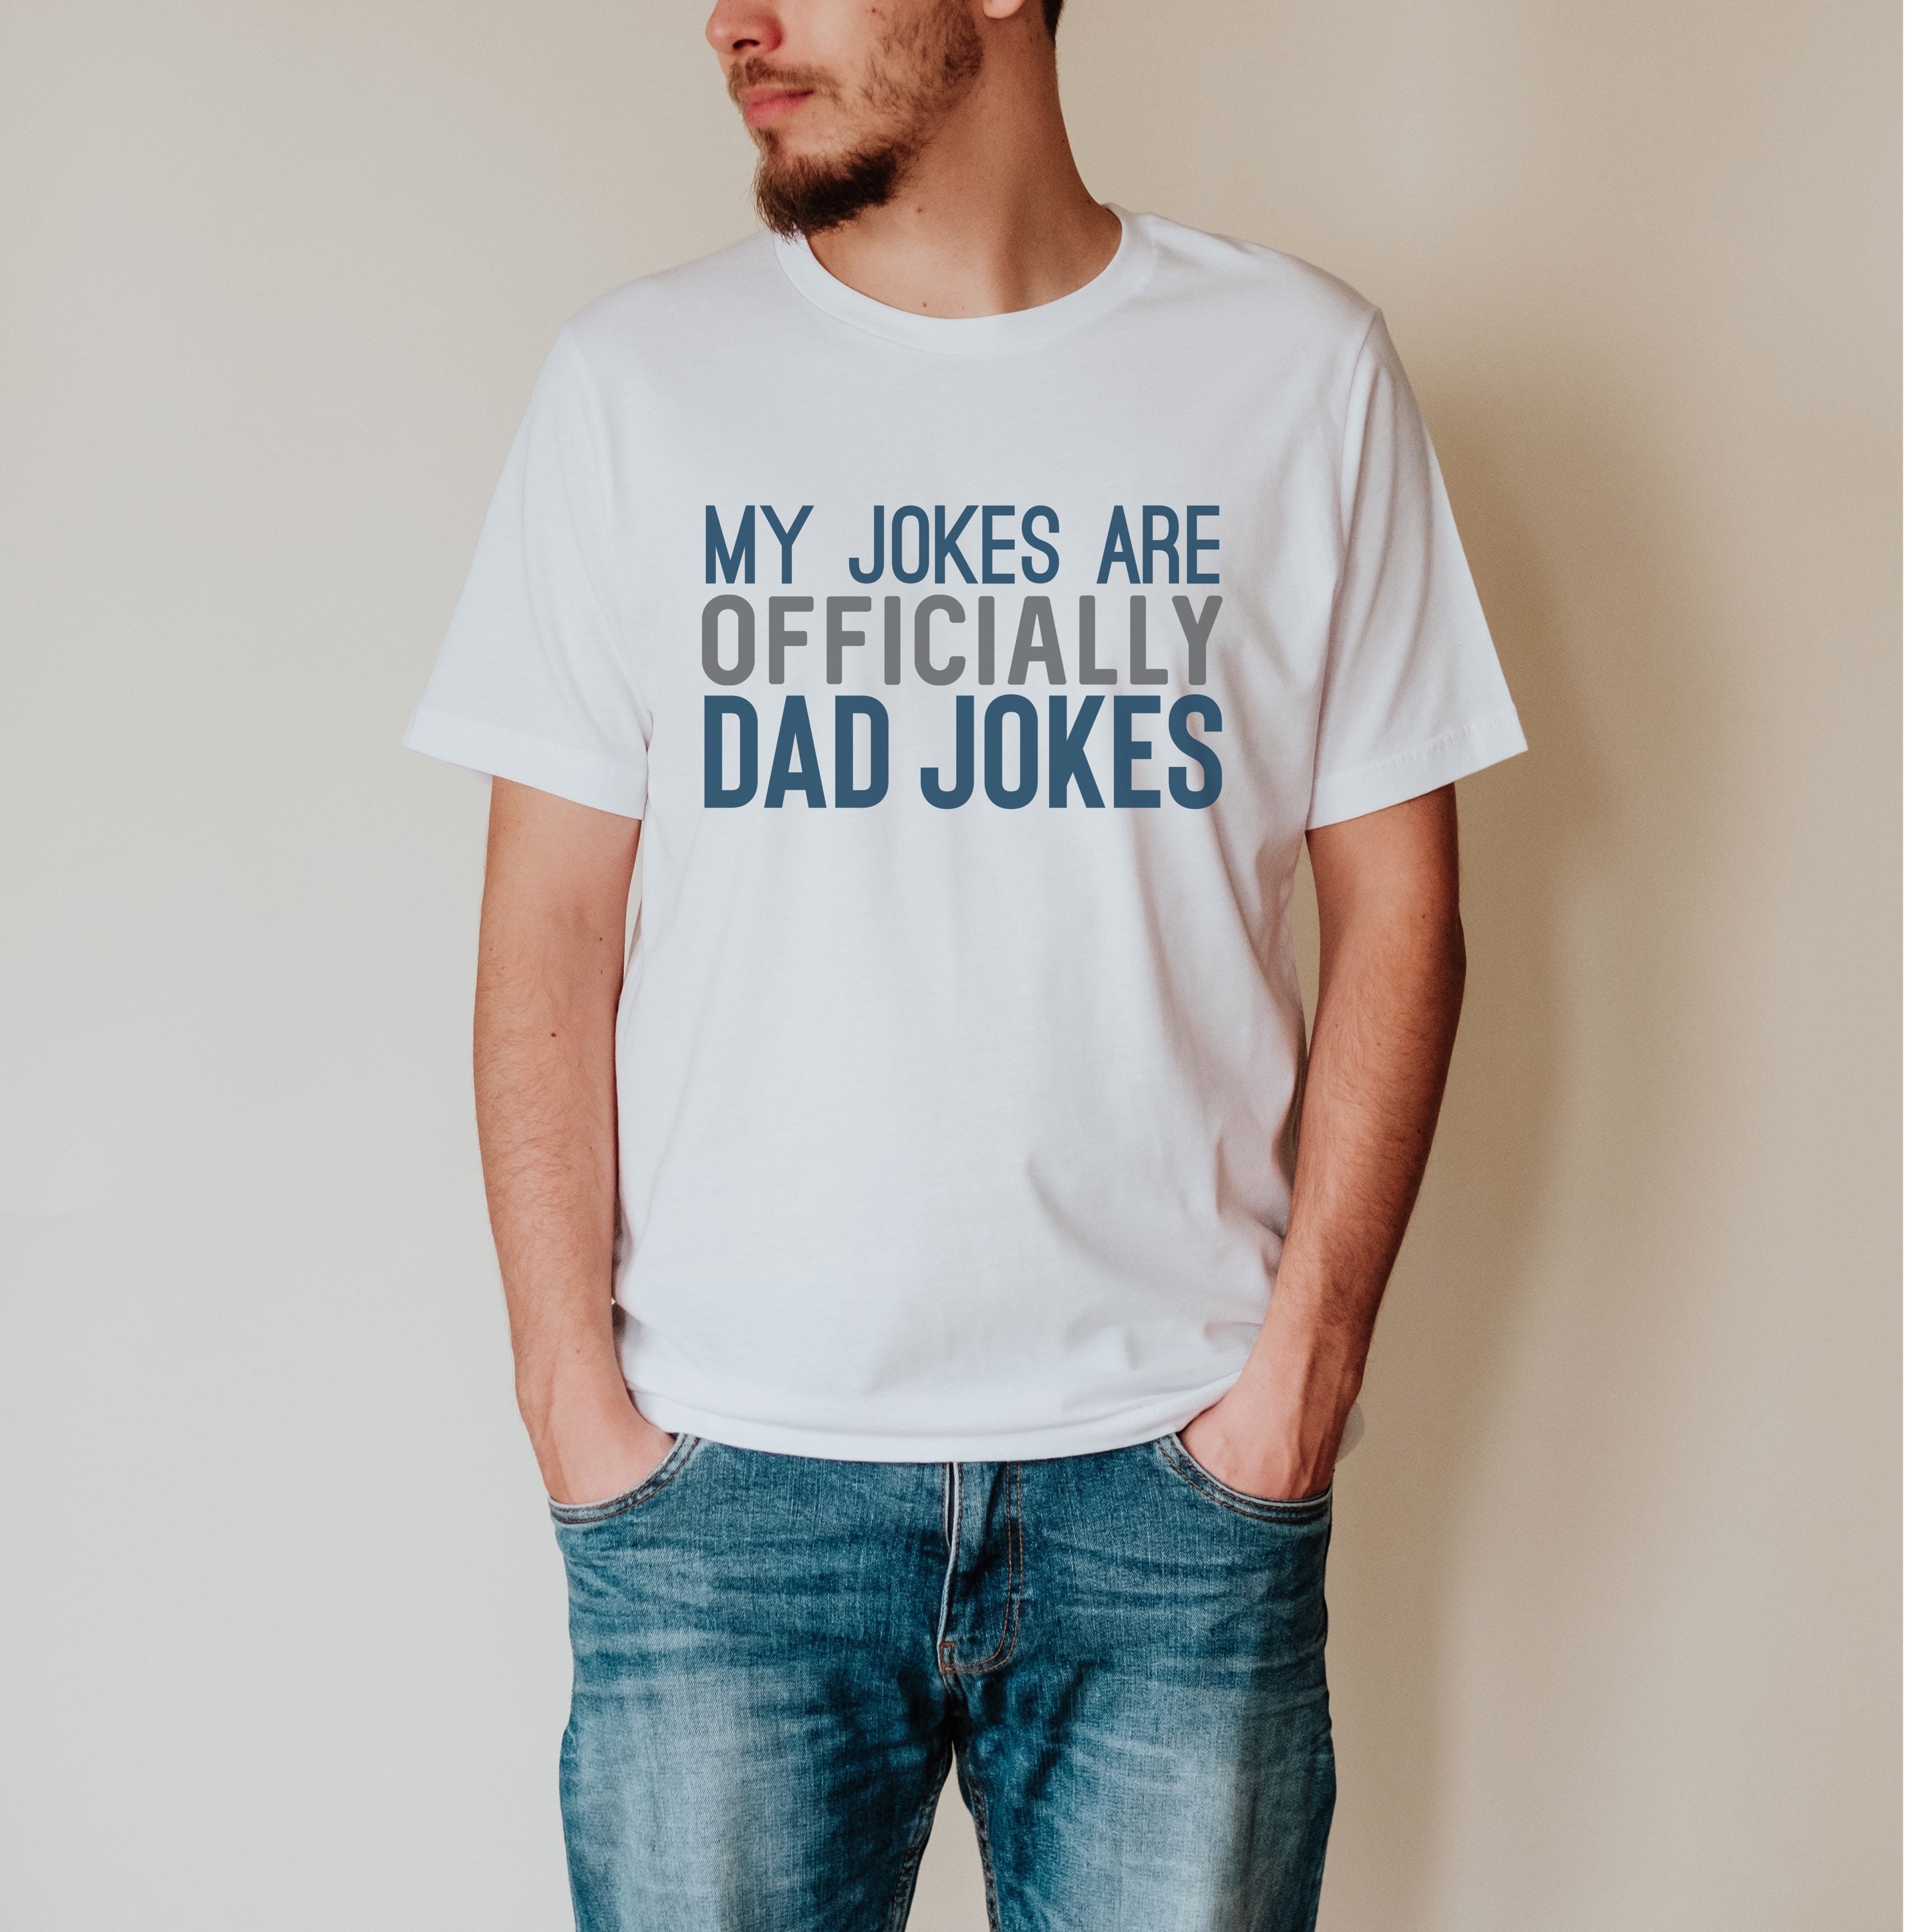 My Jokes Are Officially Dad Jokes Tee Shirt Gift For Father | My XXX Hot Girl